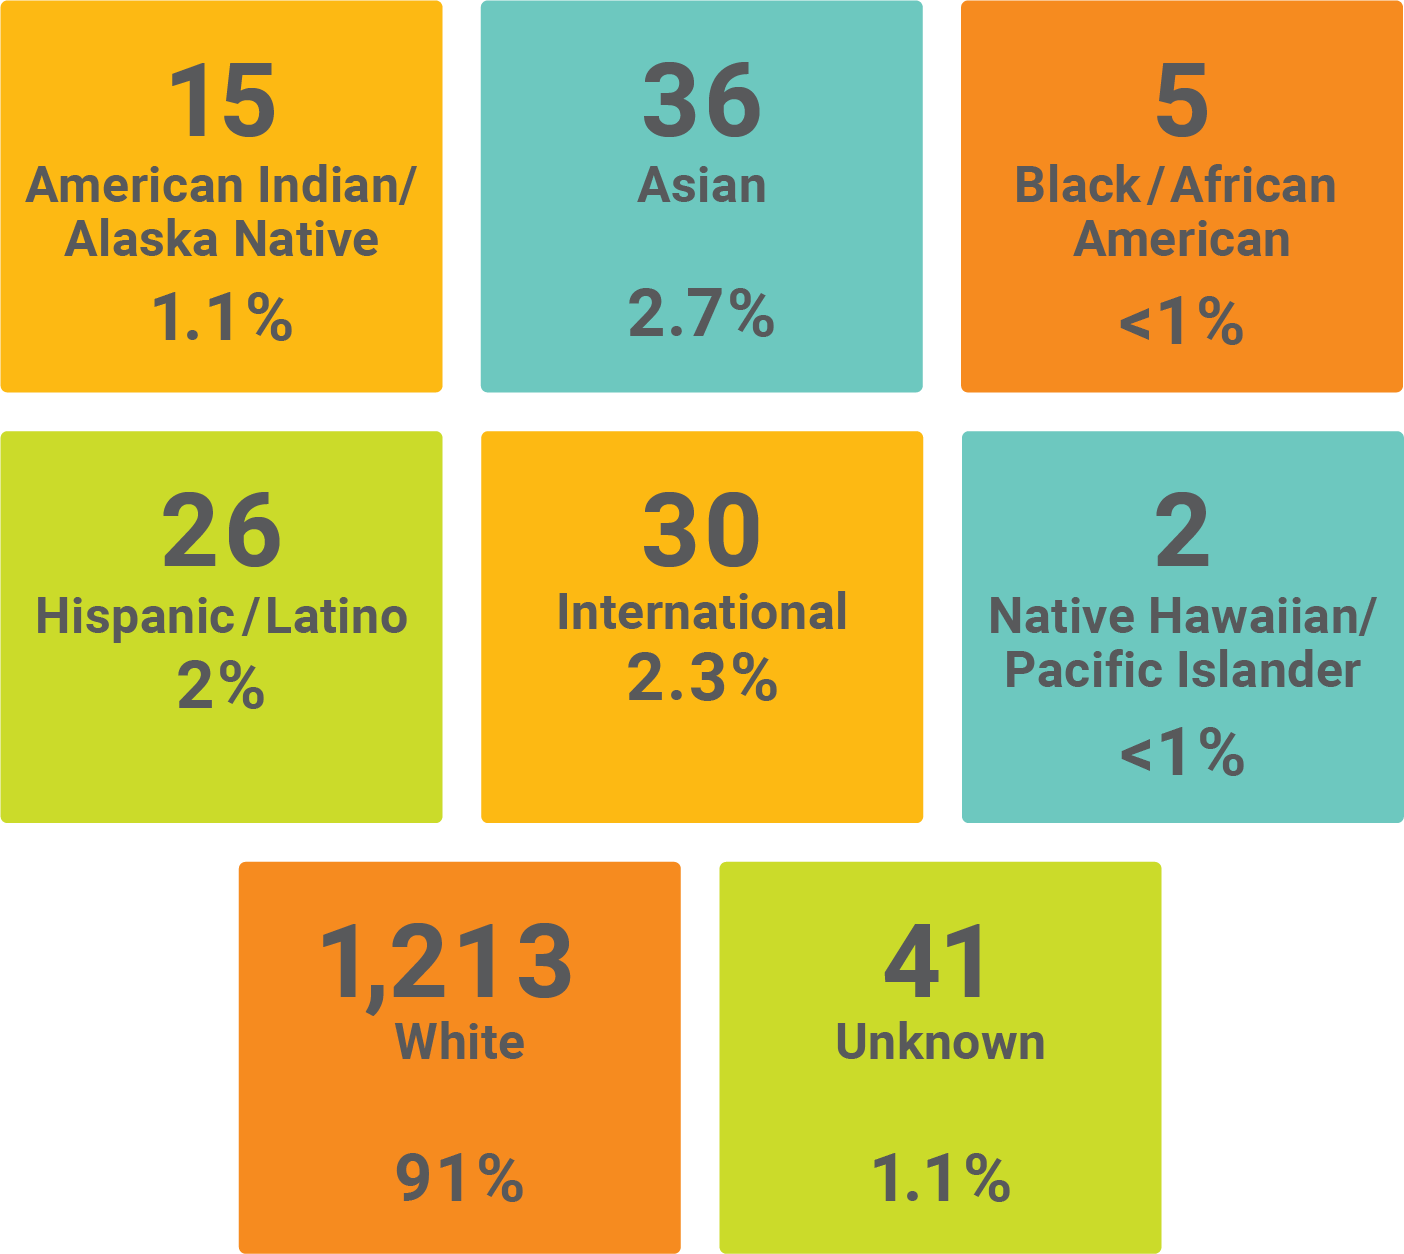 Graphic showing the demographics of faculty by race and ethnicity. American Indian/Alaska Native with 15 at 1.1%, Asian with 36 at 2.7%, Black/African American with 5 at less than 1%, Hispanic/Latino with 26 at 2%, Native Hawaiian/Pacific Islander with 2 at less than 1%, White with 1,213 at 91%, and Unknown with 41 at 1.1% 